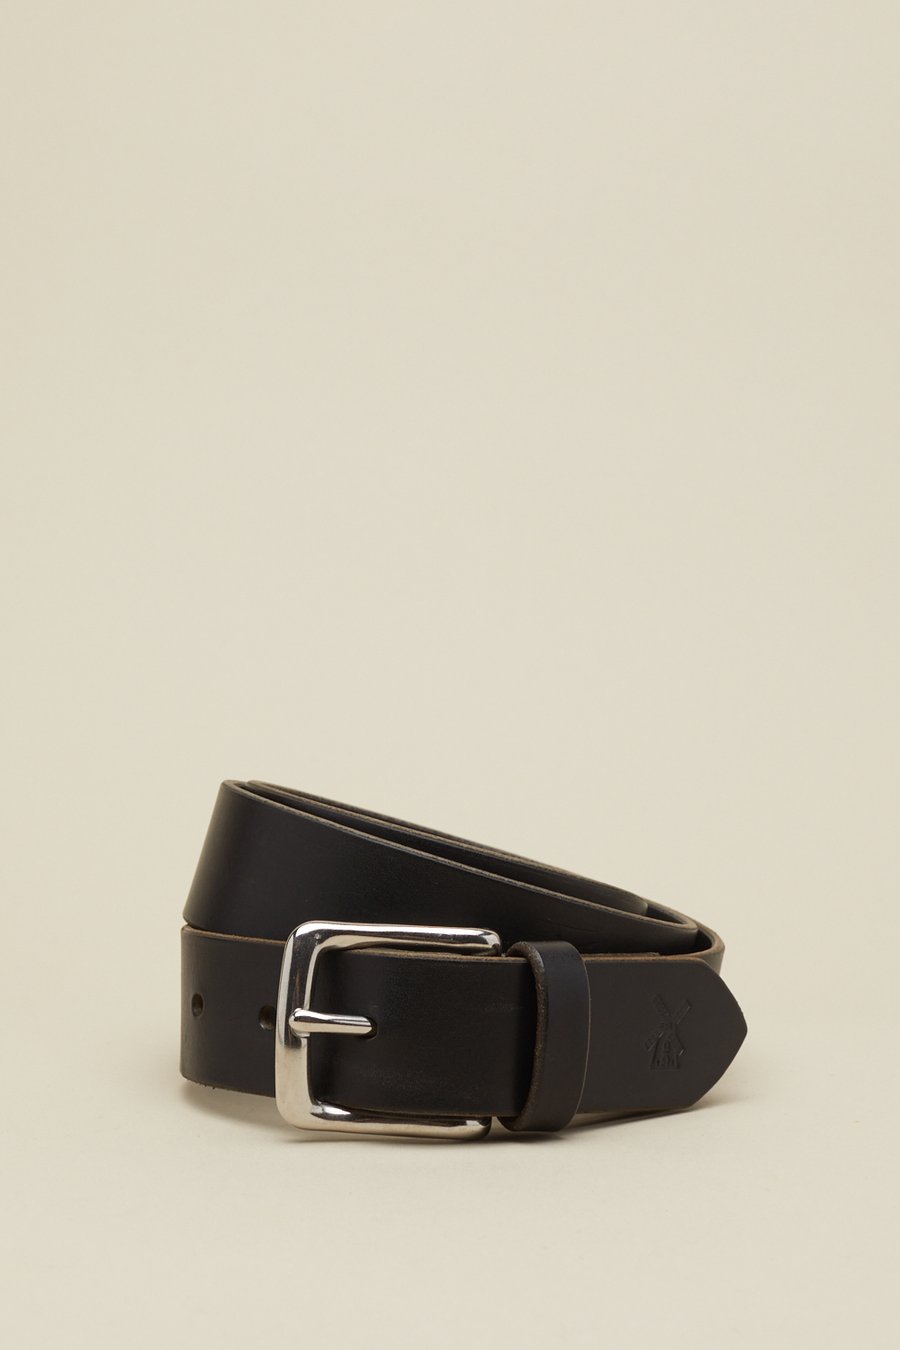 Image of Classic Buckle in Coal